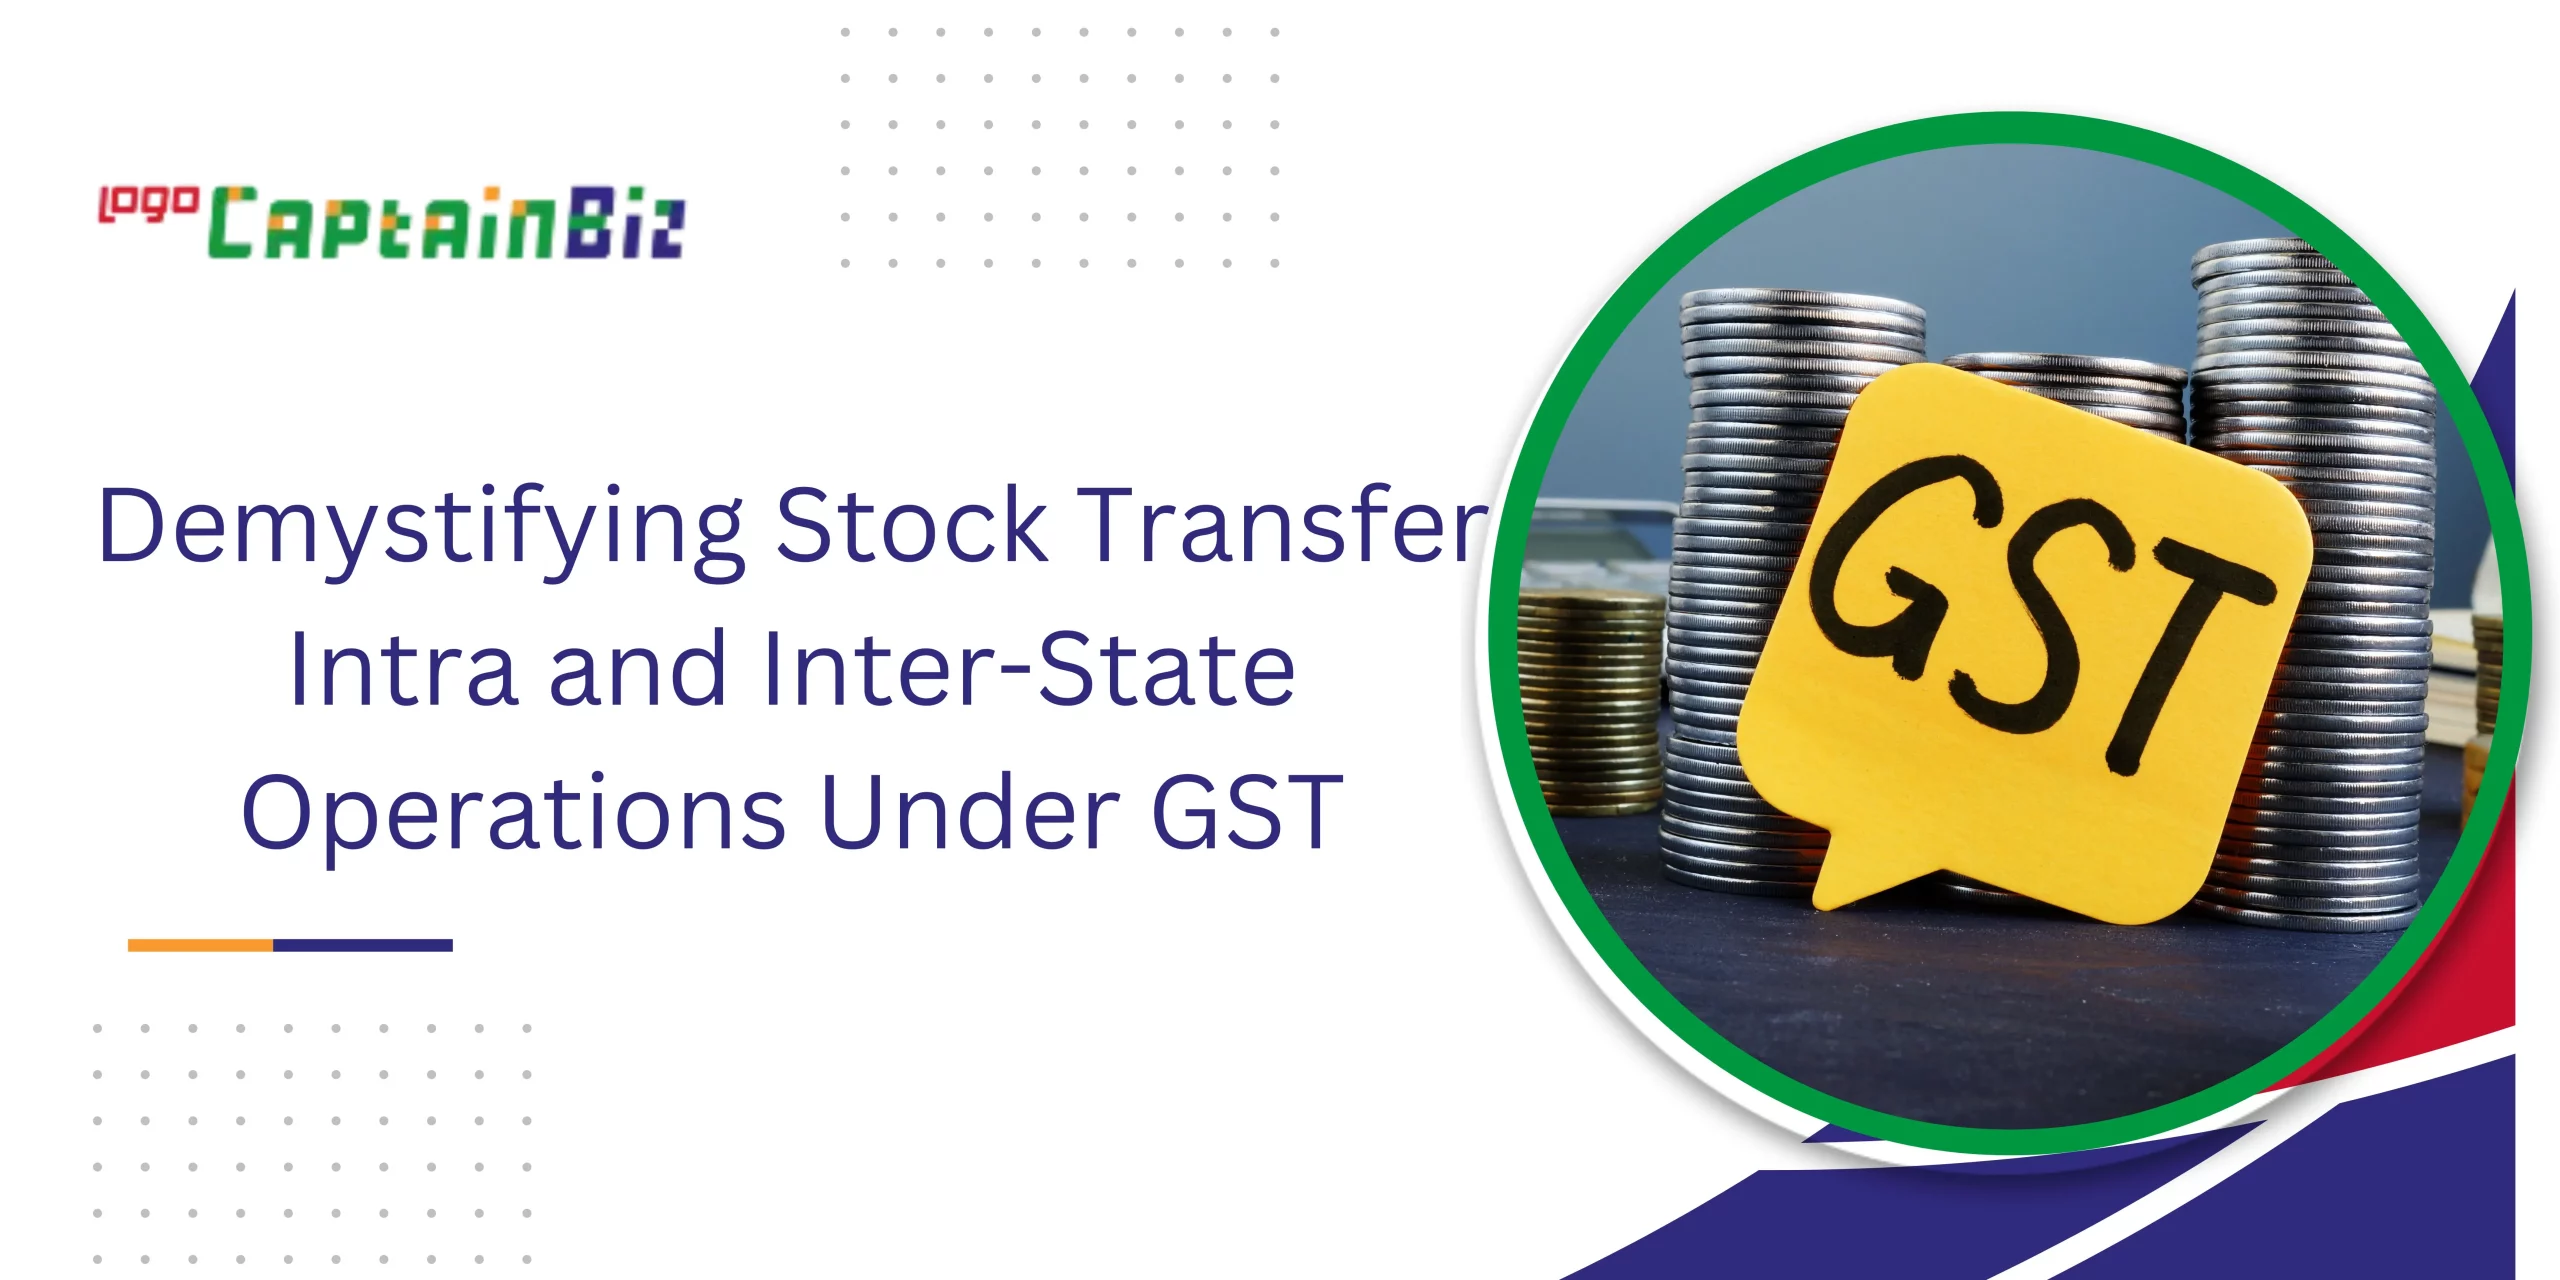 CaptainBiz: Demystifying Stock Transfer Intra and Inter-State Operations Under GST